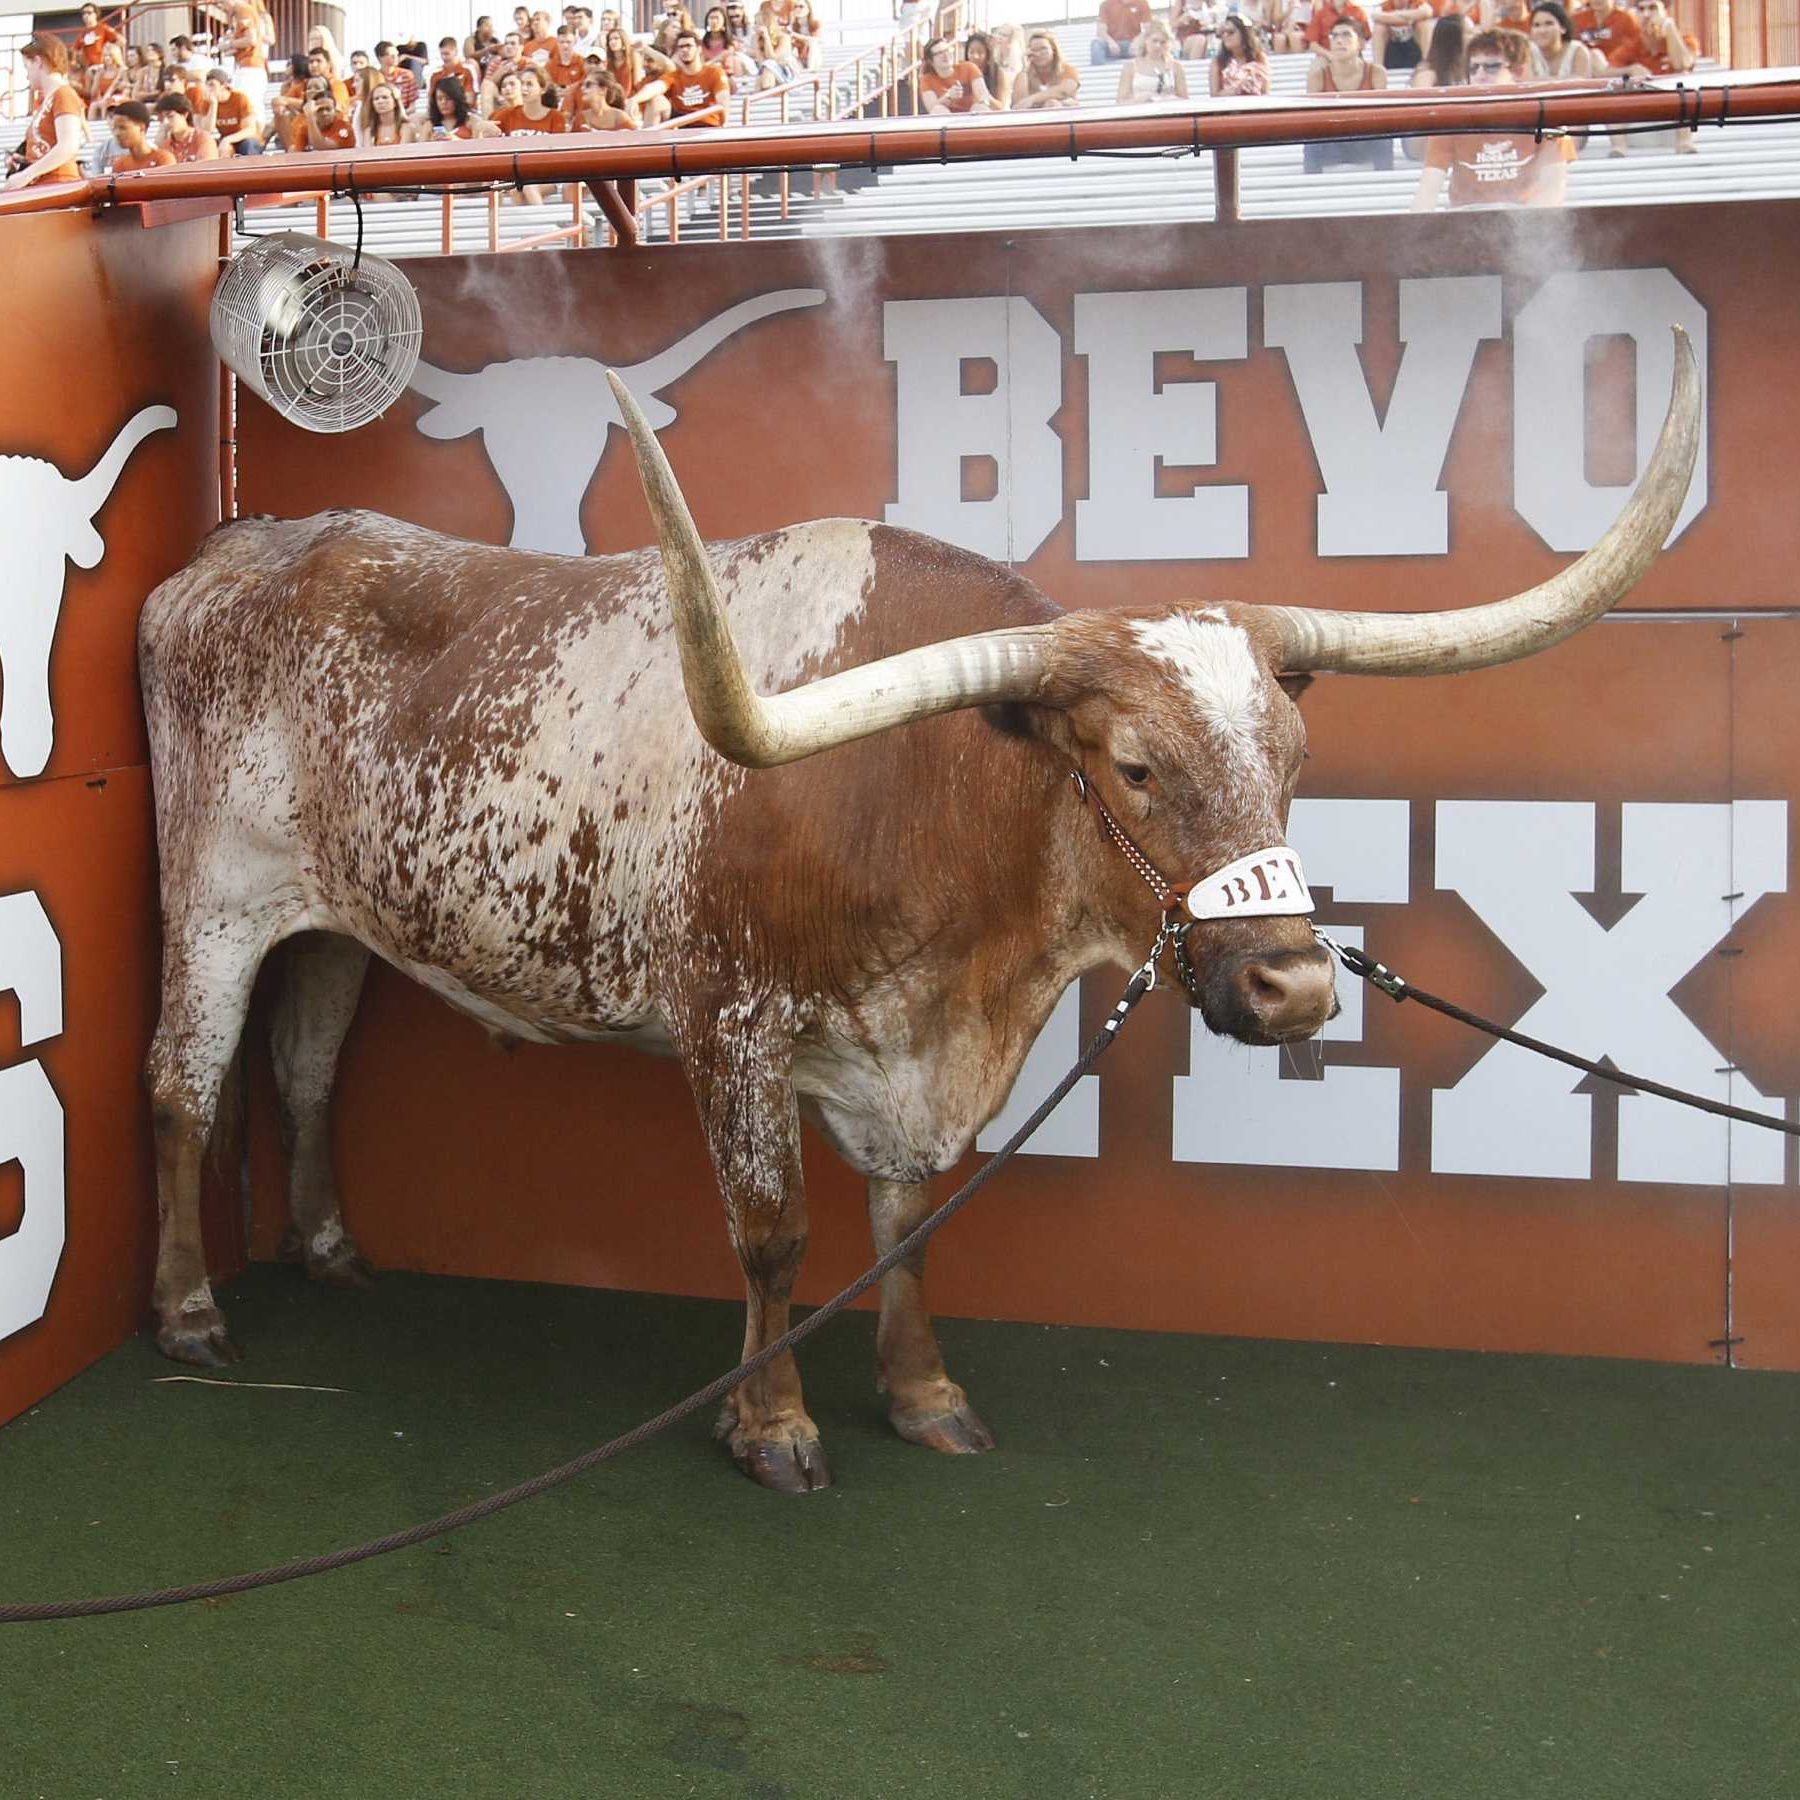 AUSTIN, TX - SEPTEMBER 14: Texas Longhorns mascot Bevo is seen during the game against the Ole Miss Rebels at Darrell K Royal-Texas Memorial Stadium on September 14, 2013 in Austin, Texas. The Rebels won the game 44-23. (Photo by Joe Robbins/Getty Images)